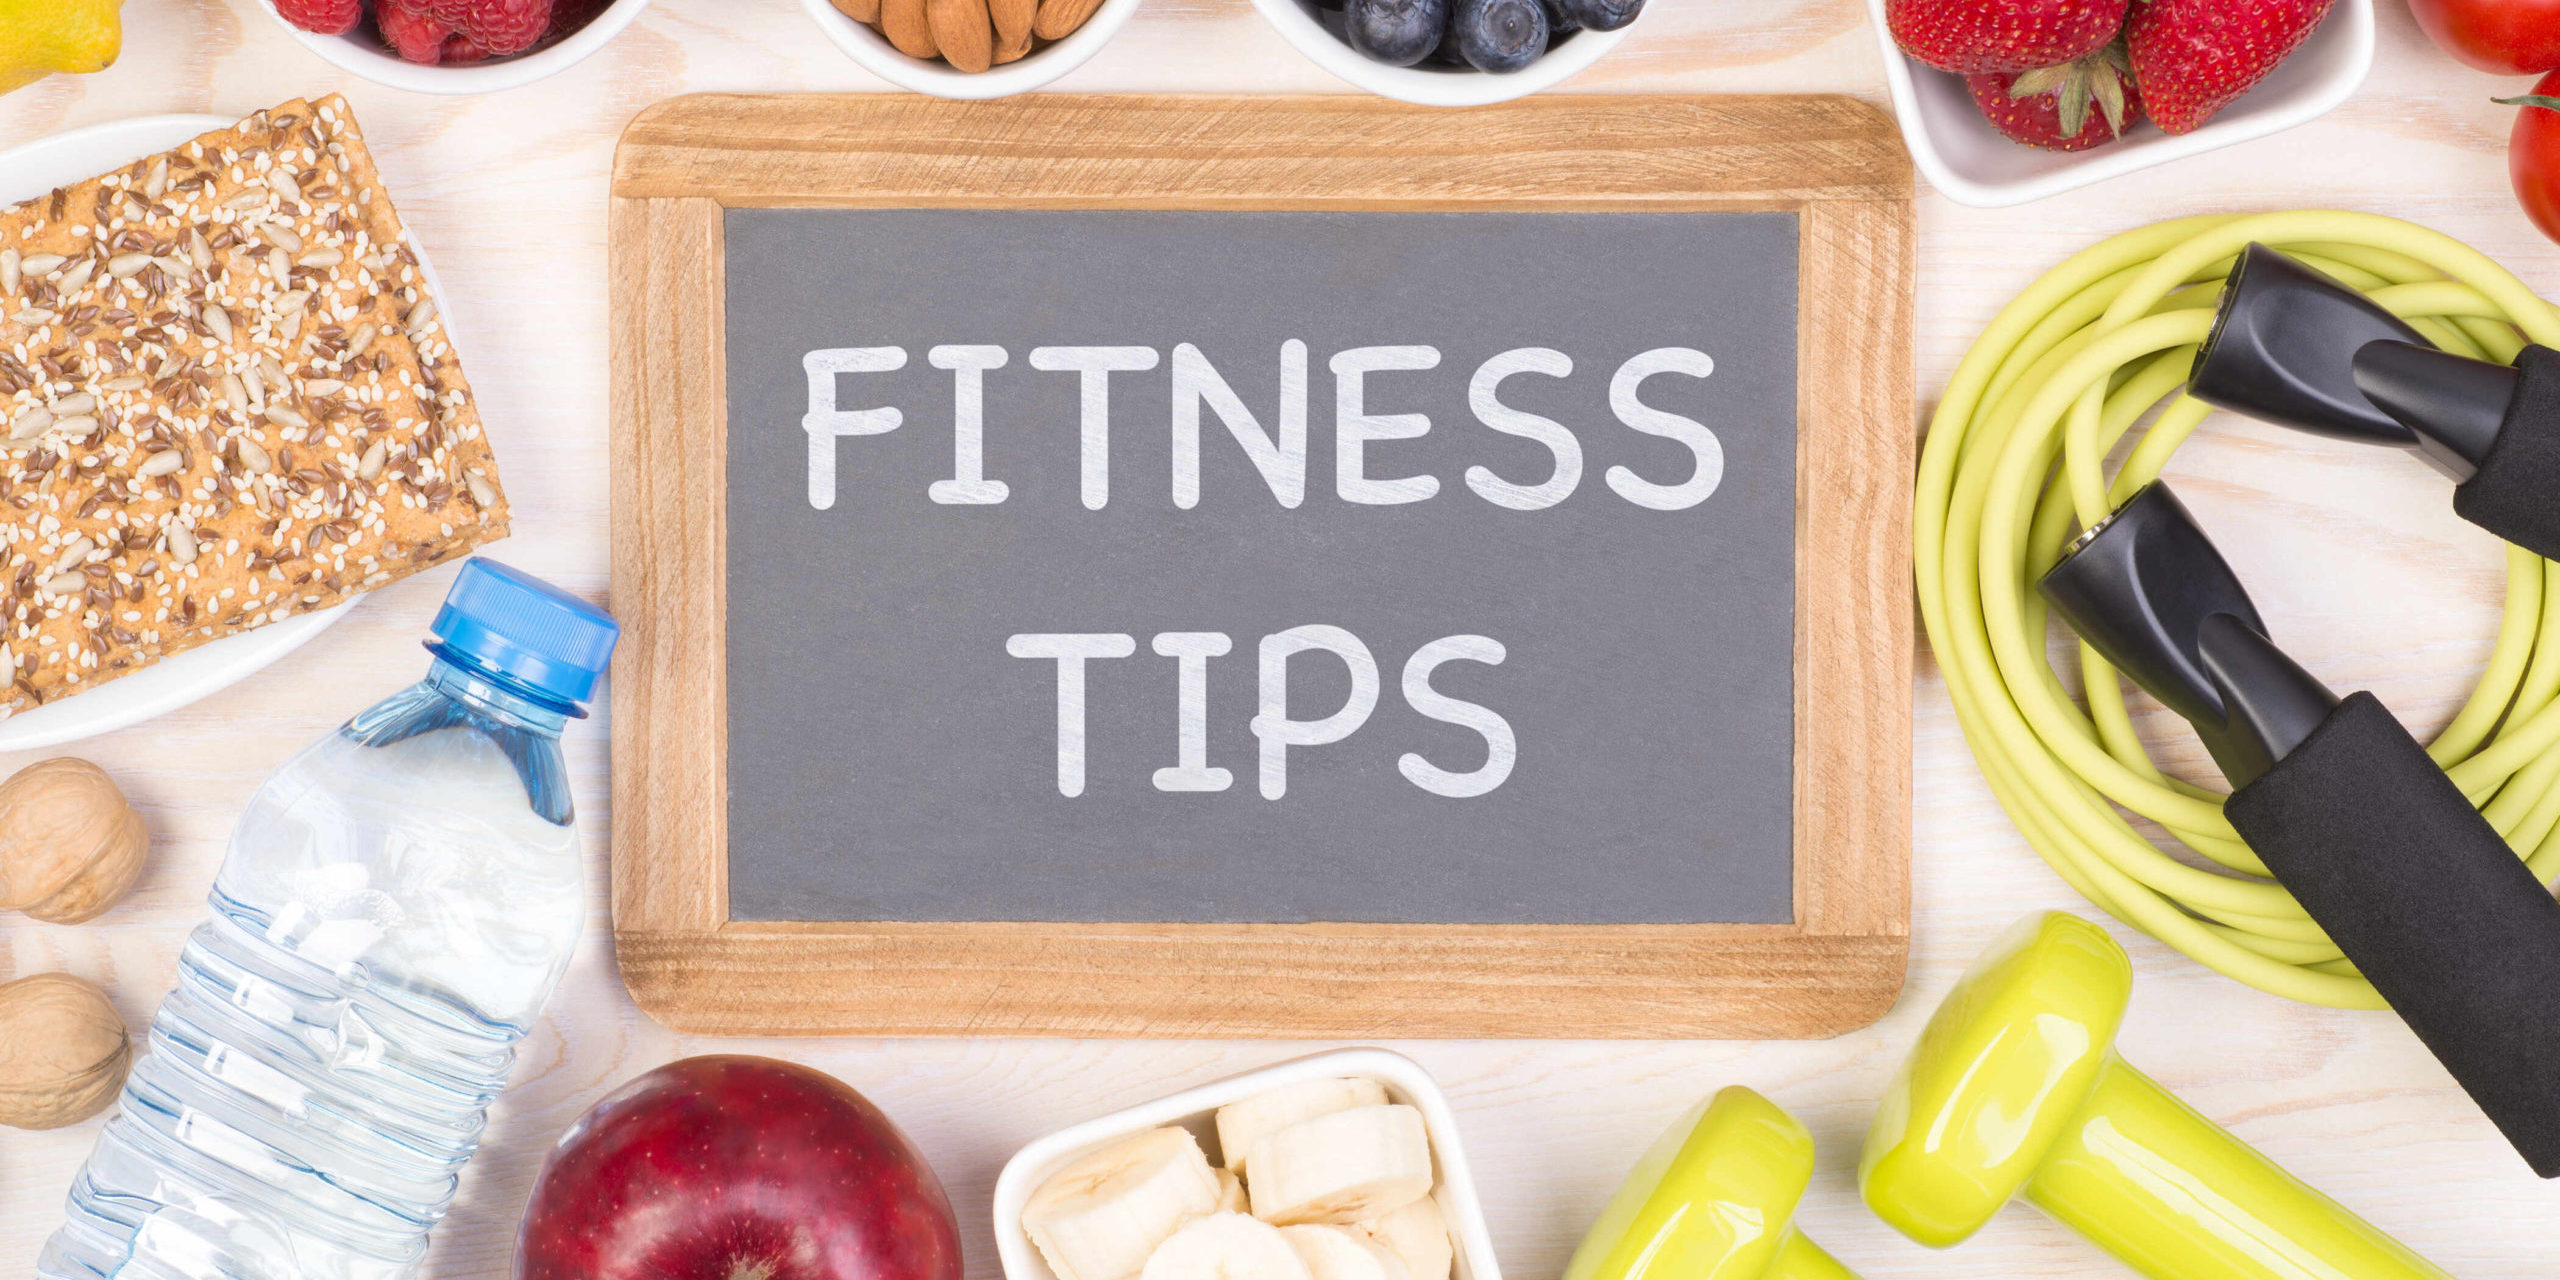 Healthy Lifestyle - Tips on Healthy Eating and Fitness